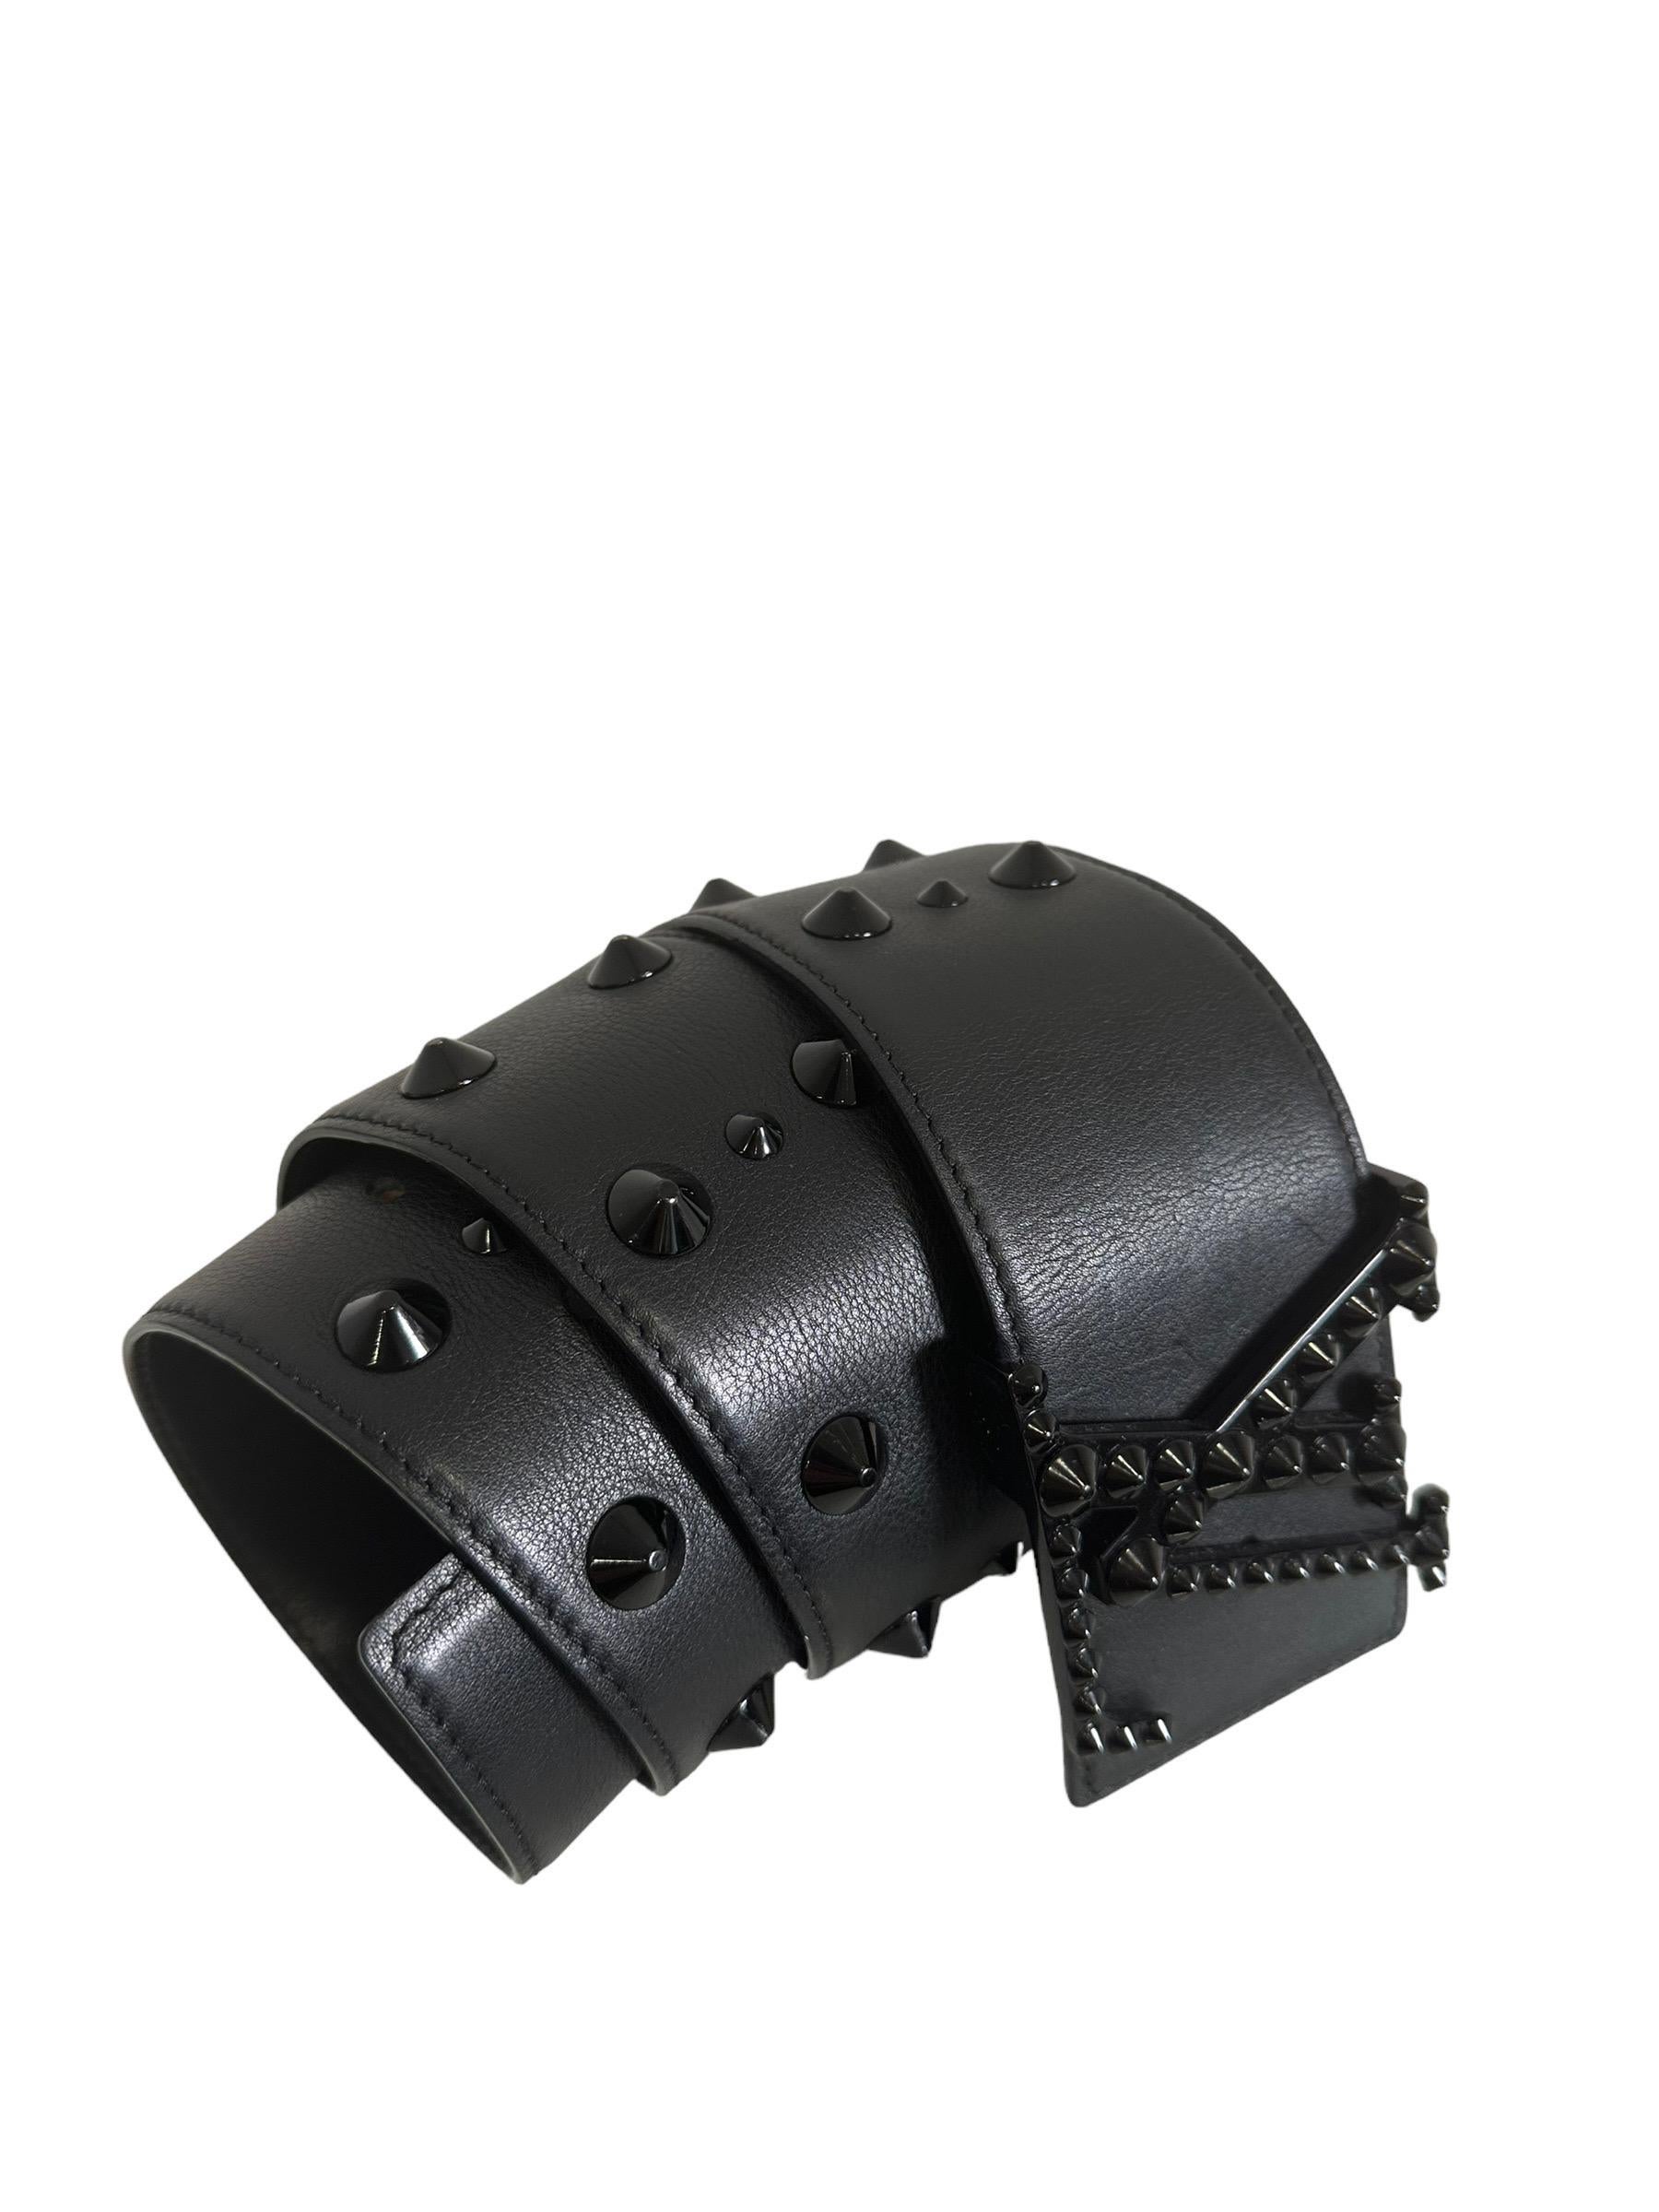 Louis Vuitton belt, made of leather with black hardware. Equipped with a large LV logo buckle. covered with studs. It measures 85cm in length and 6cm in height. Featuring additional studs that extend across the entire surface. It has no signs of